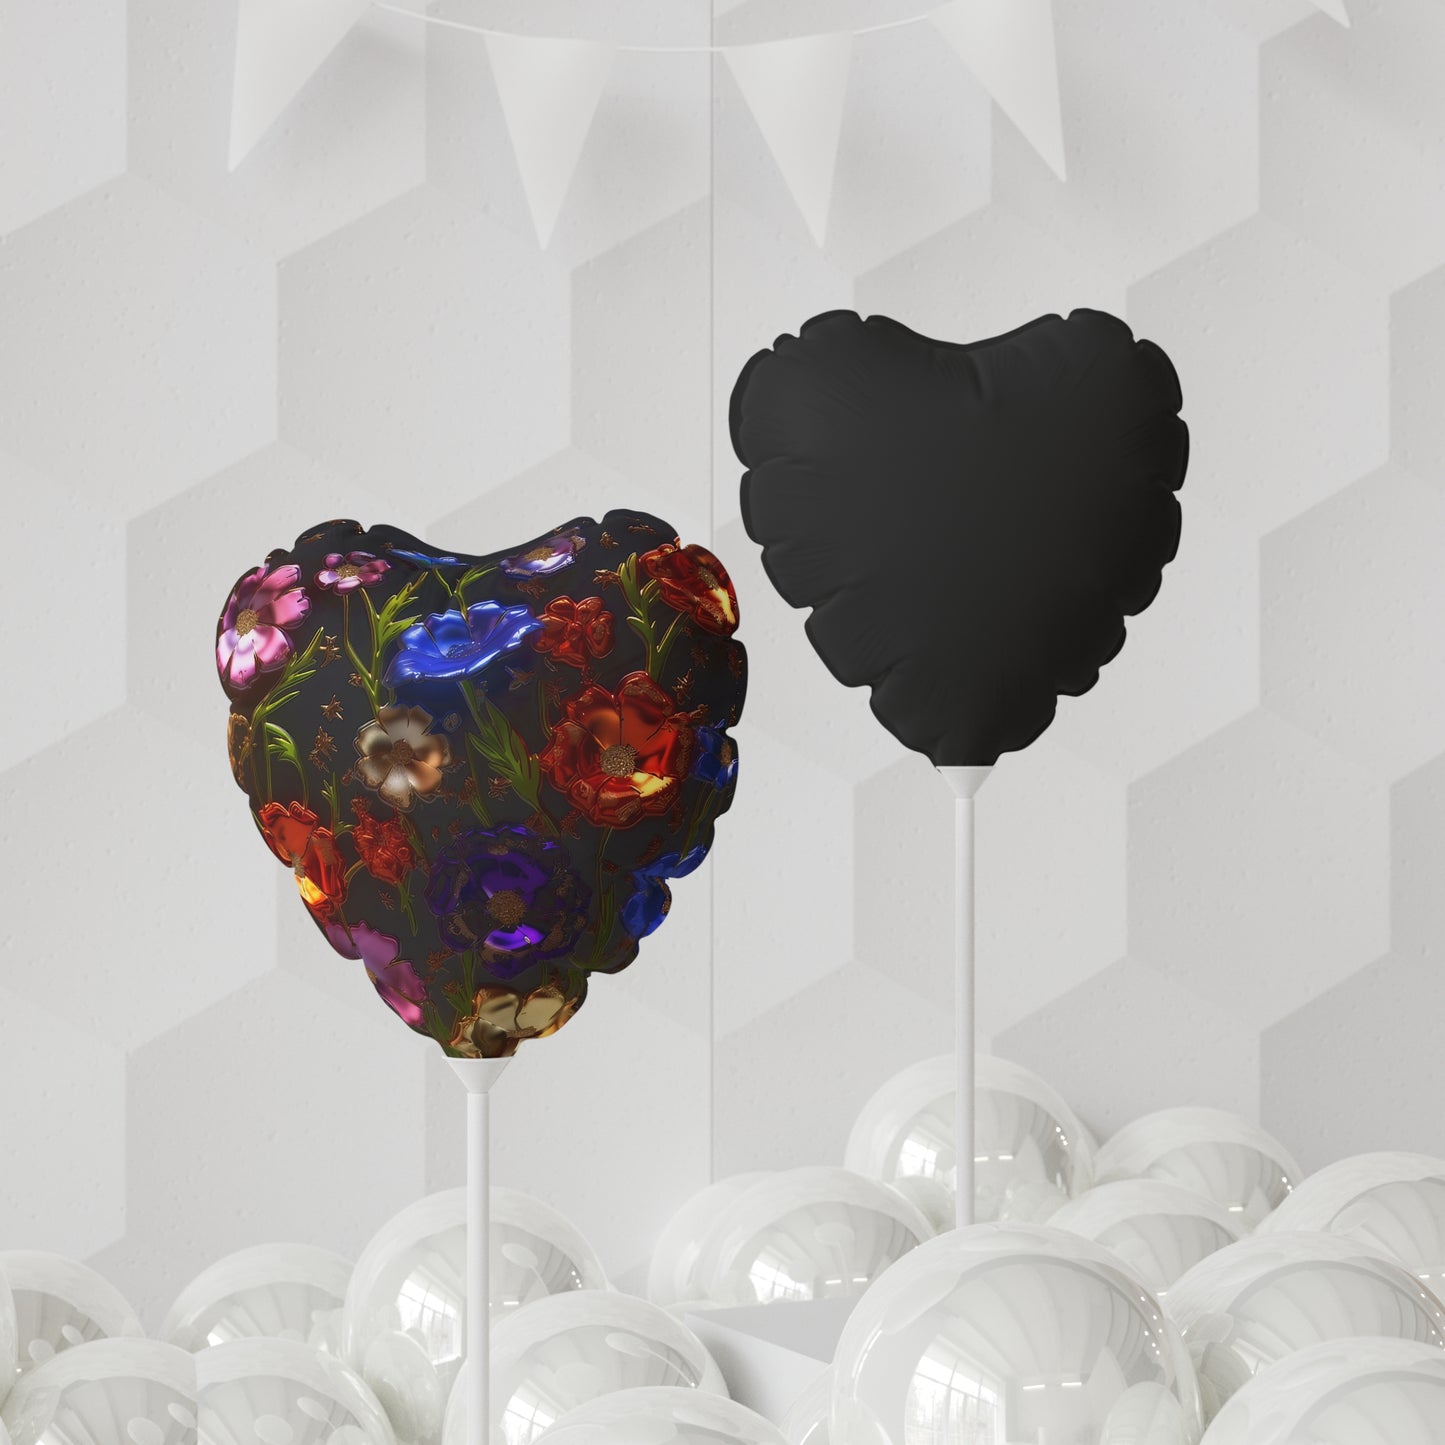 Bold & Beautiful & Metallic Wildflowers, Gorgeous floral Design, Style 7 Balloon (Round and Heart-shaped), 11"